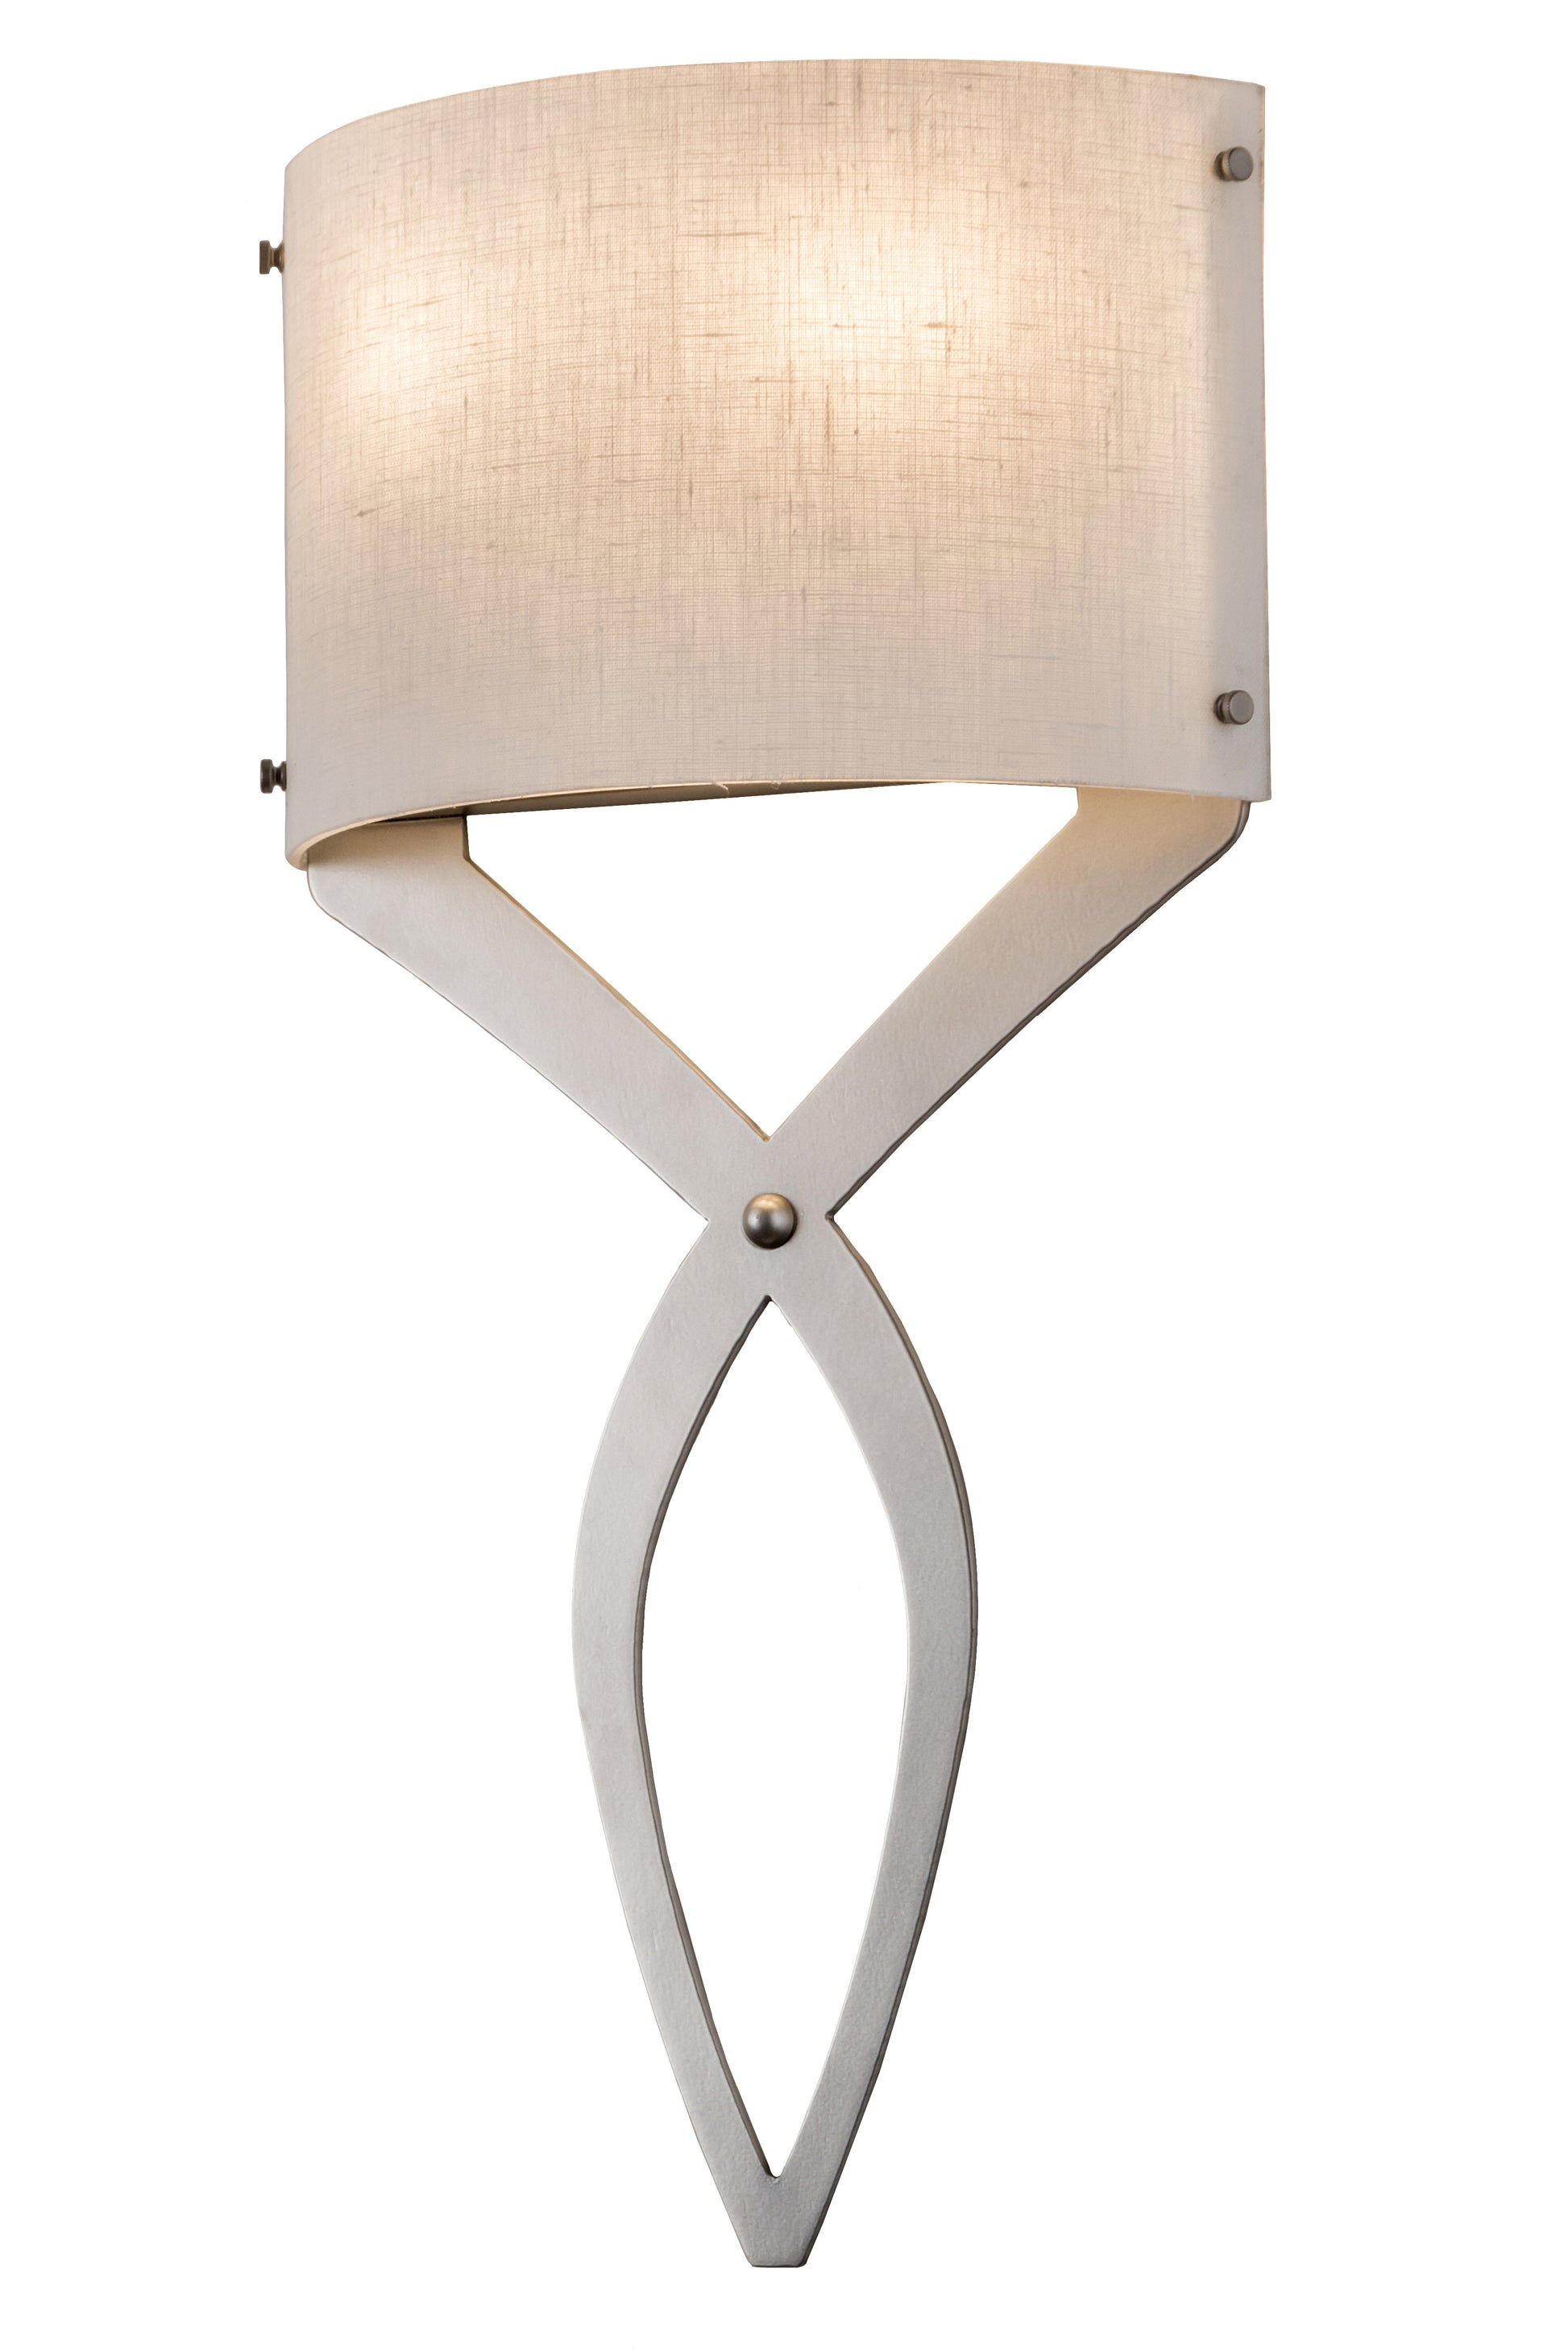 12" Canterbury Wall Sconce by 2nd Ave Lighting